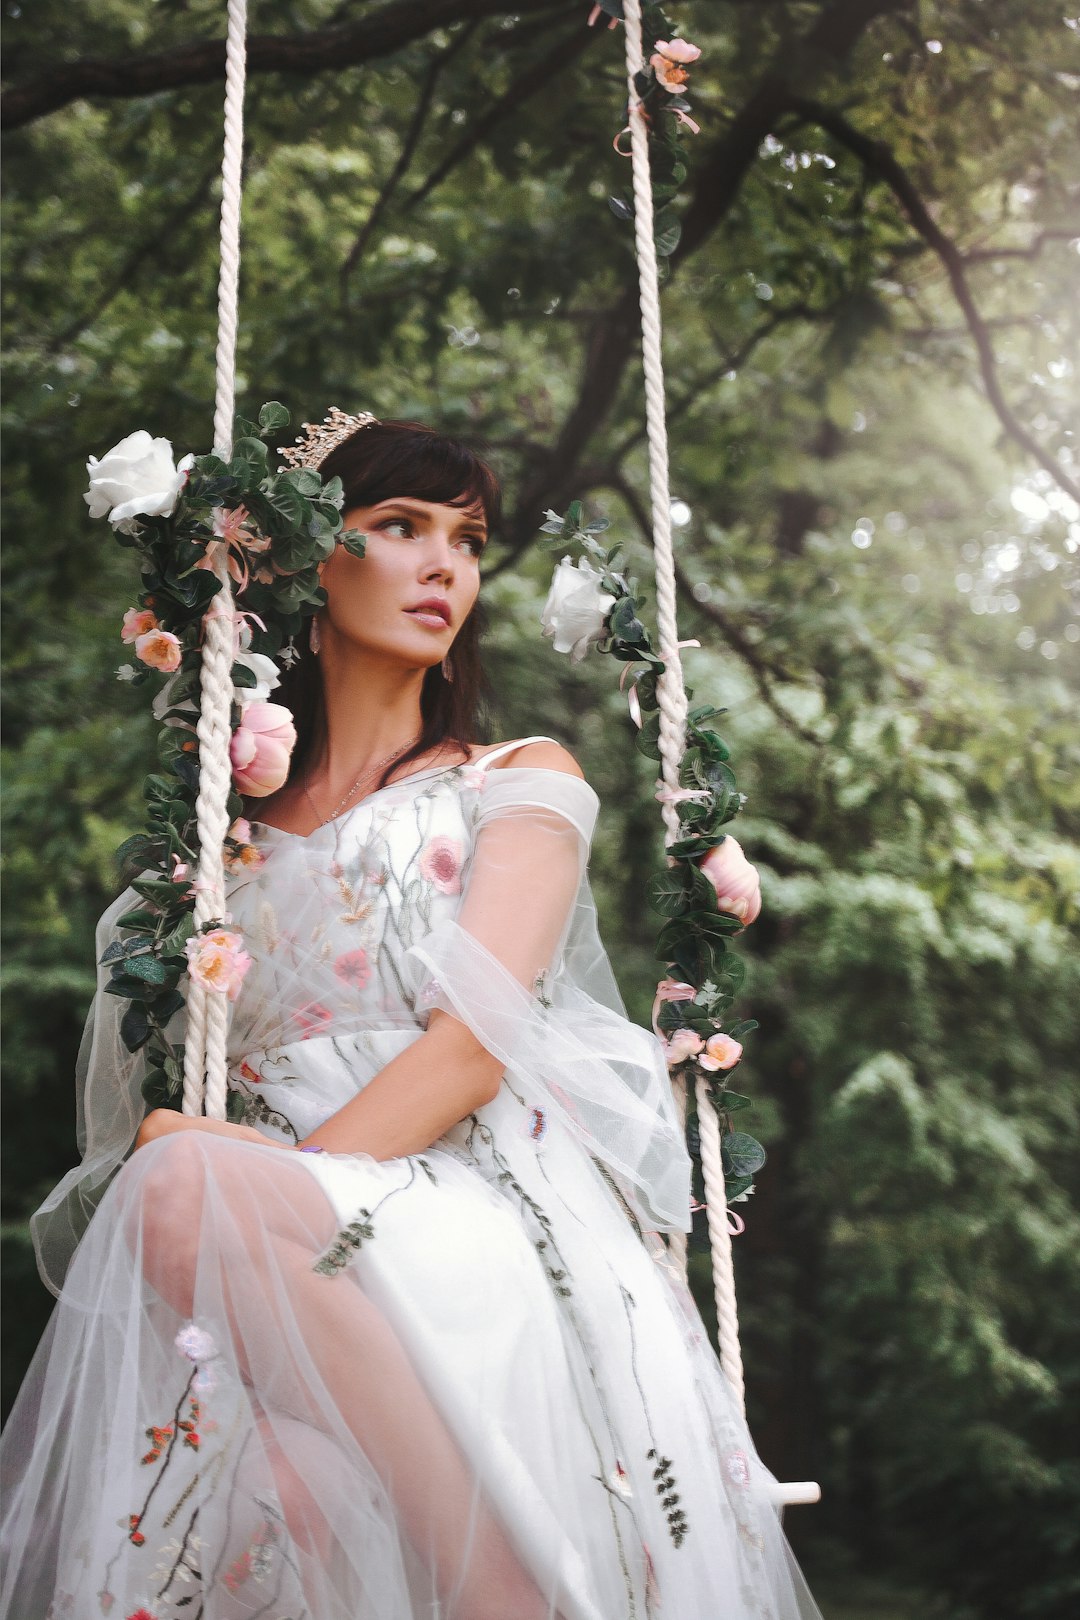 silver queen, silver queen peppers, woman wearing wedding gown sitting on outdoor swing near tall trees